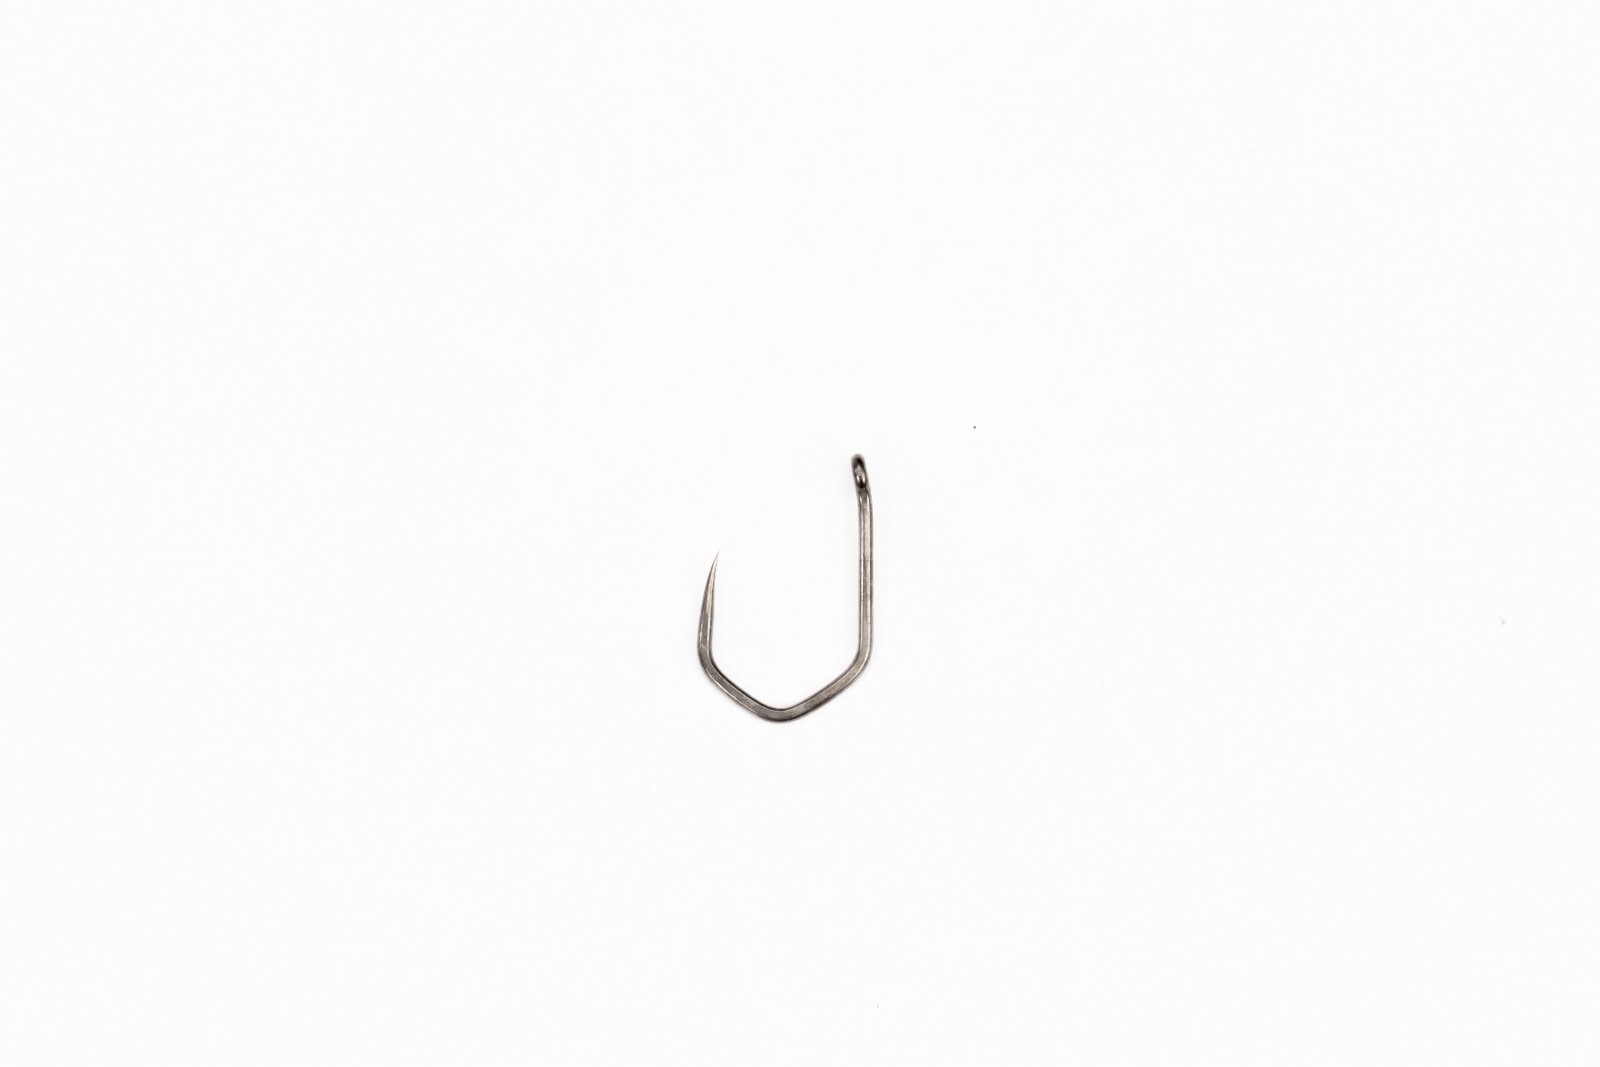 Nash Claw Size 8 Barbless Hooks & Sharpening Tackle T6178 International Shop Europe